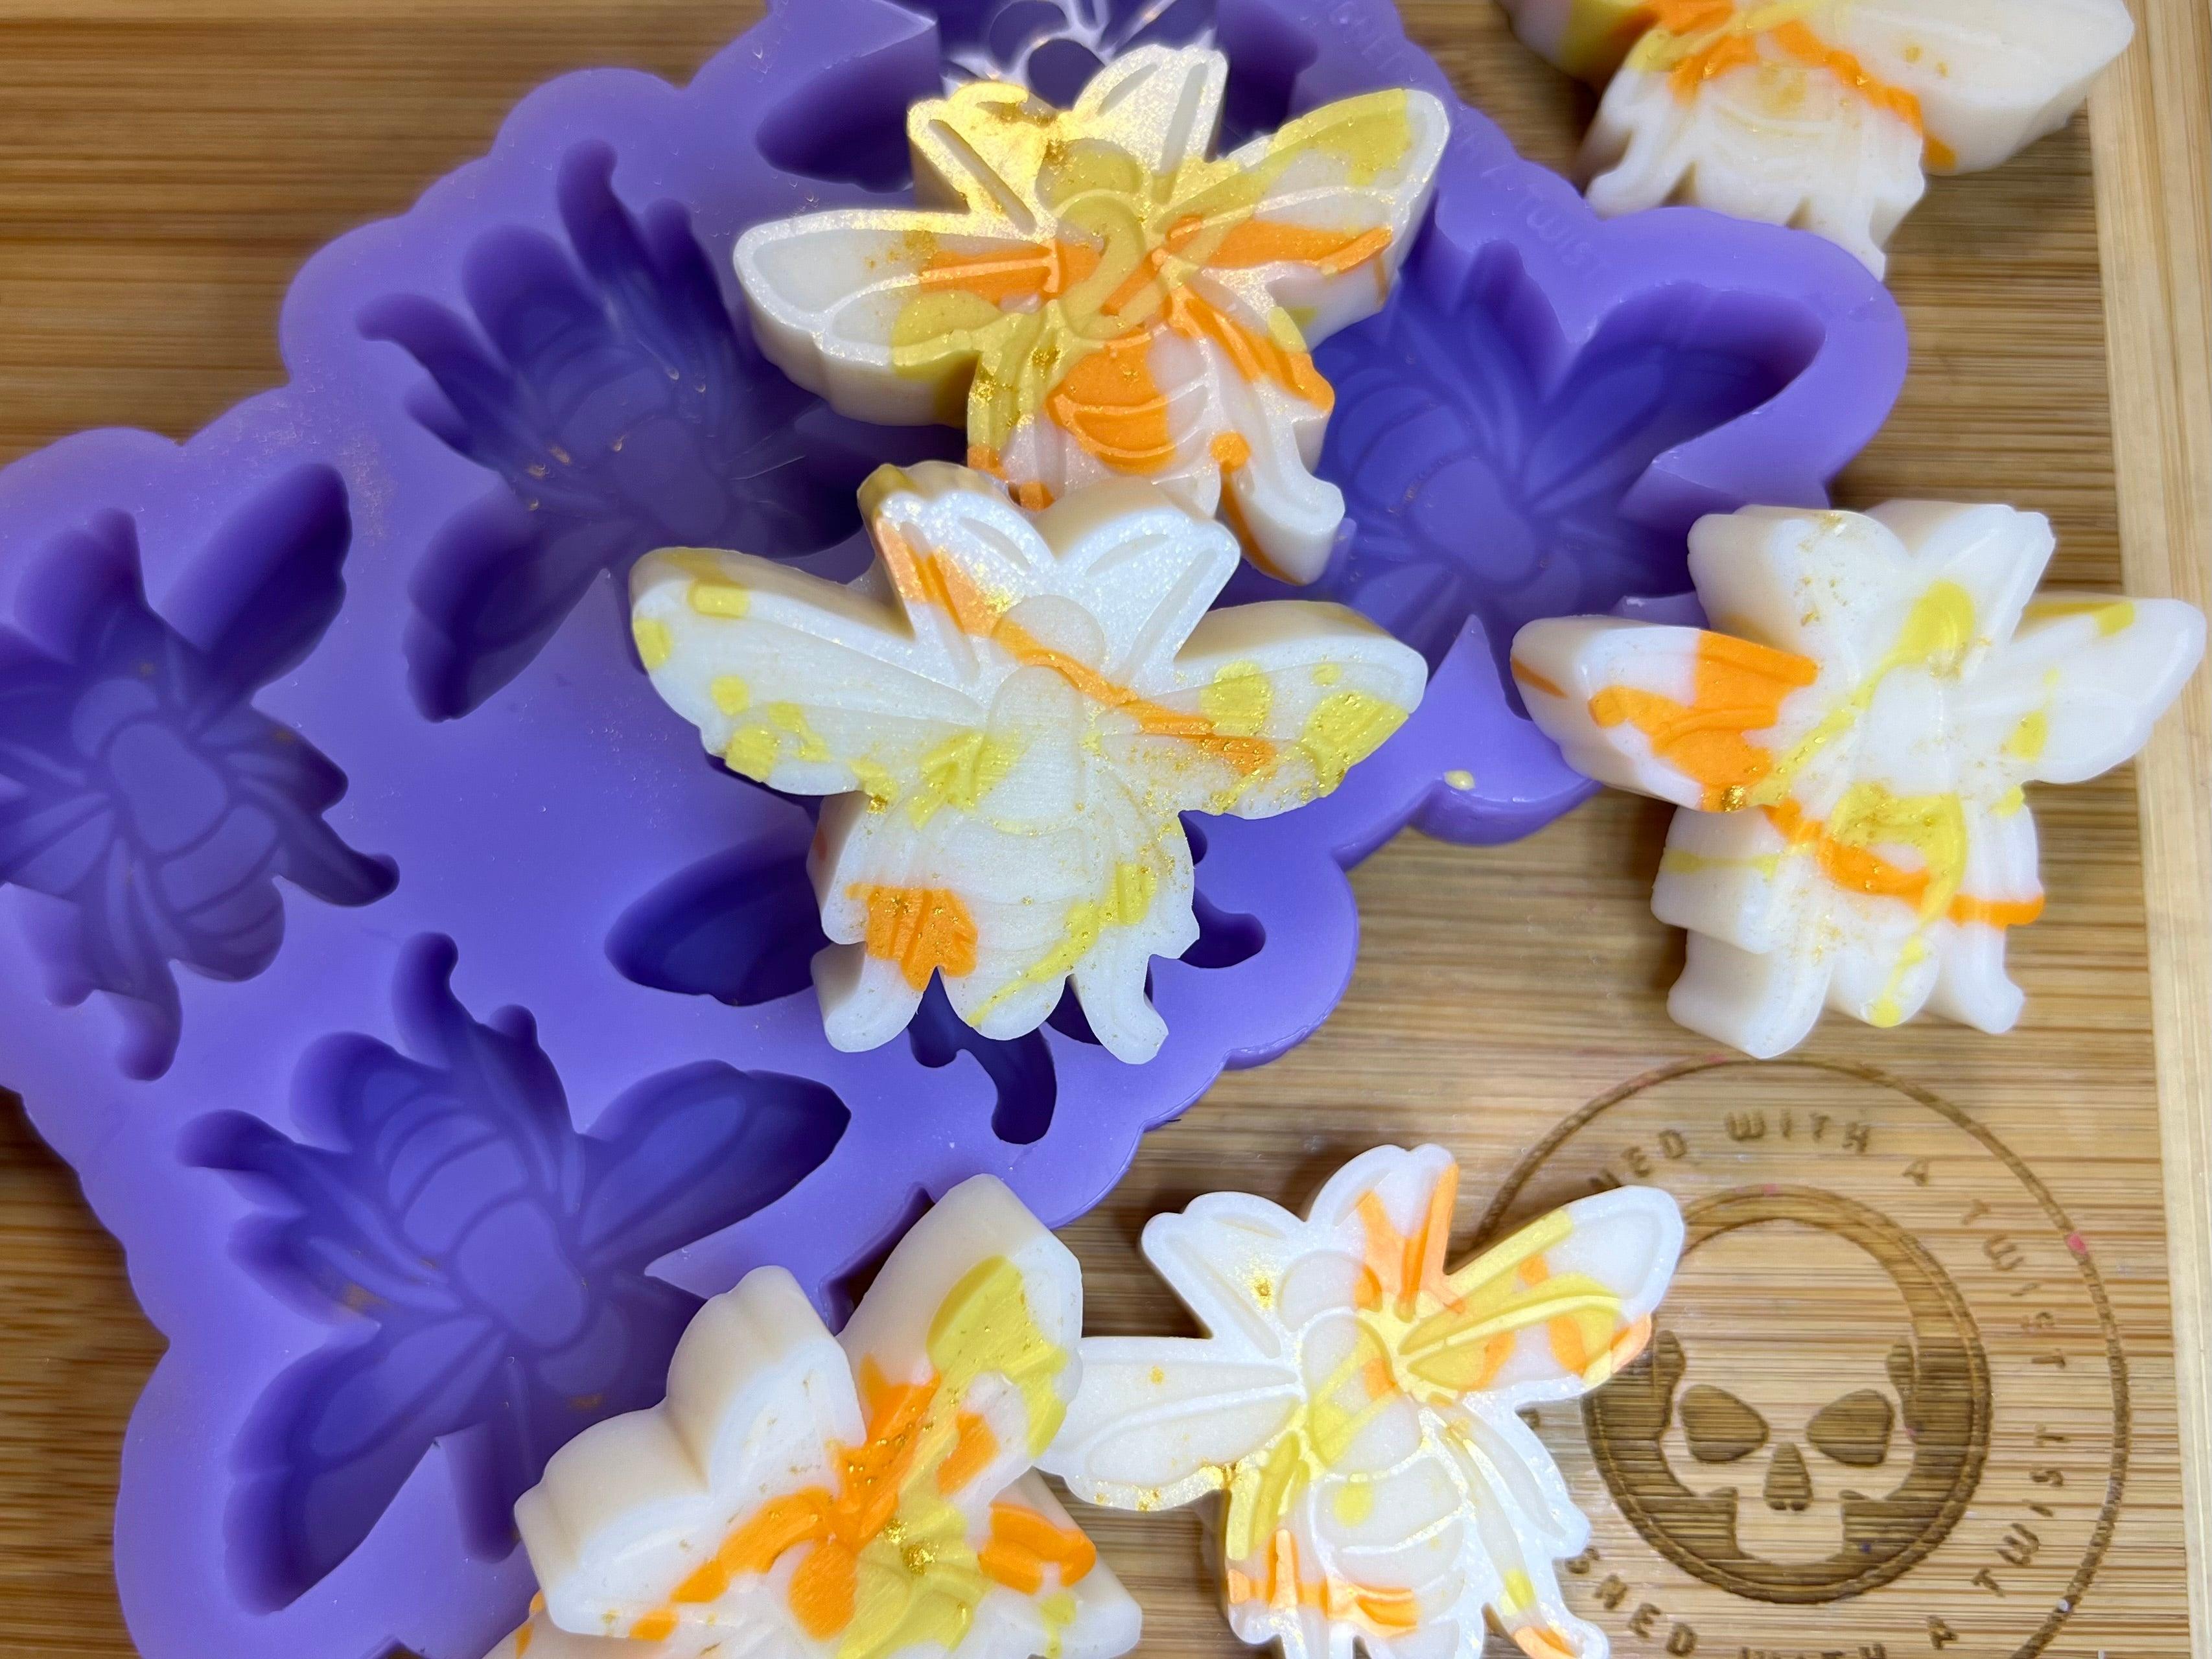 Bee Wax Melt Silicone Mold - Designed with a Twist  - Top quality silicone molds made in the UK.